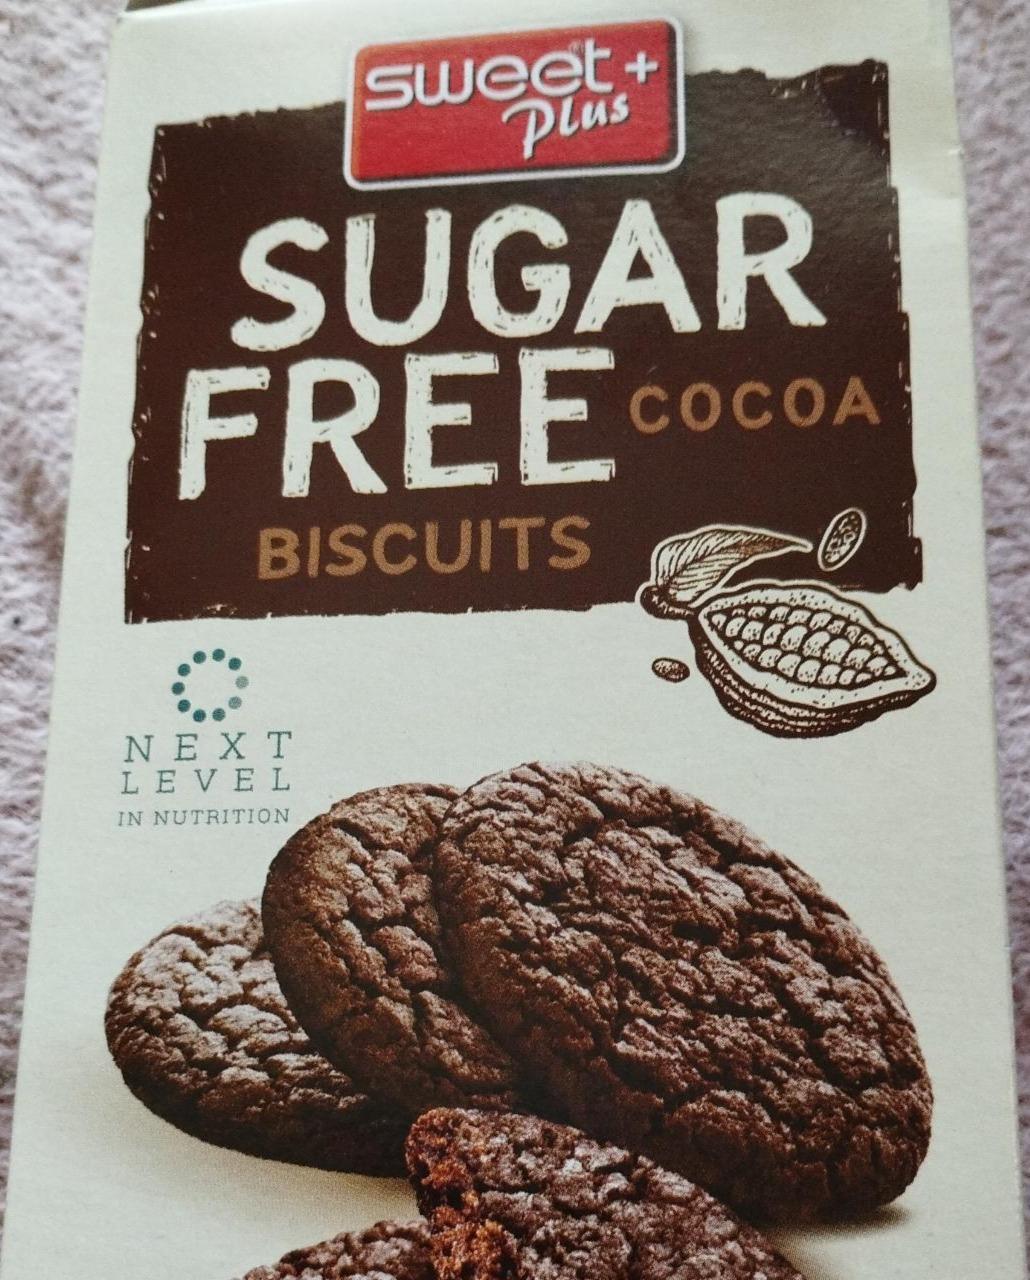 Fotografie - Sugar Free Cocoa Biscuits Sweet Plus